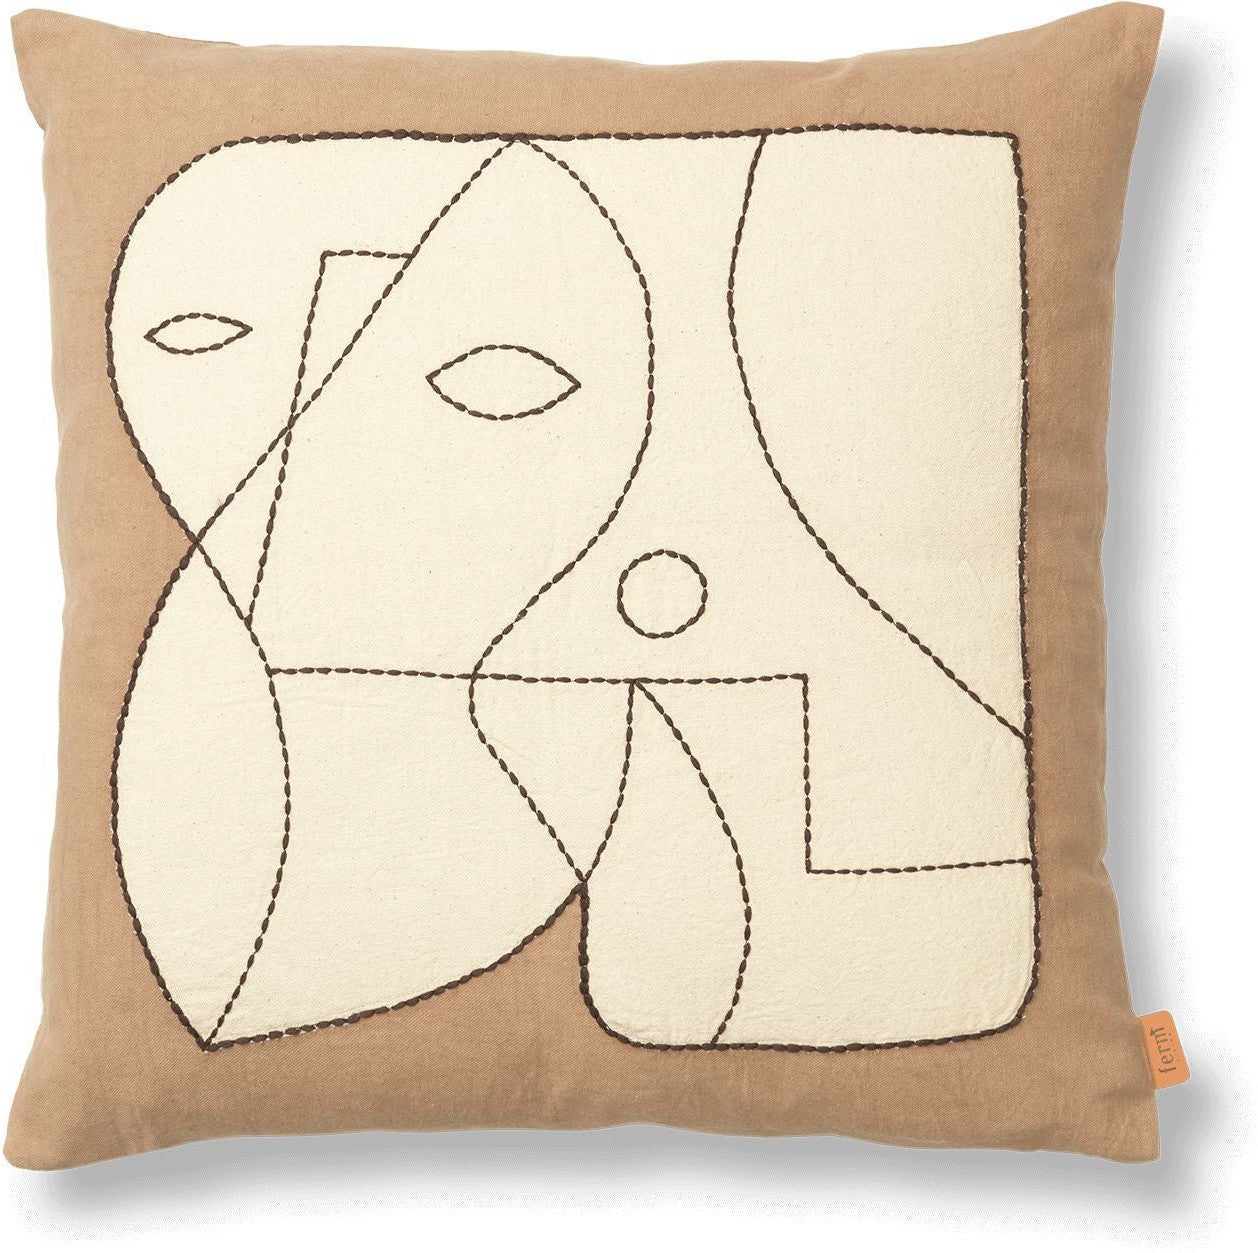 Ferm Living Figure Cushion Cover, Dark Taupe/Off White